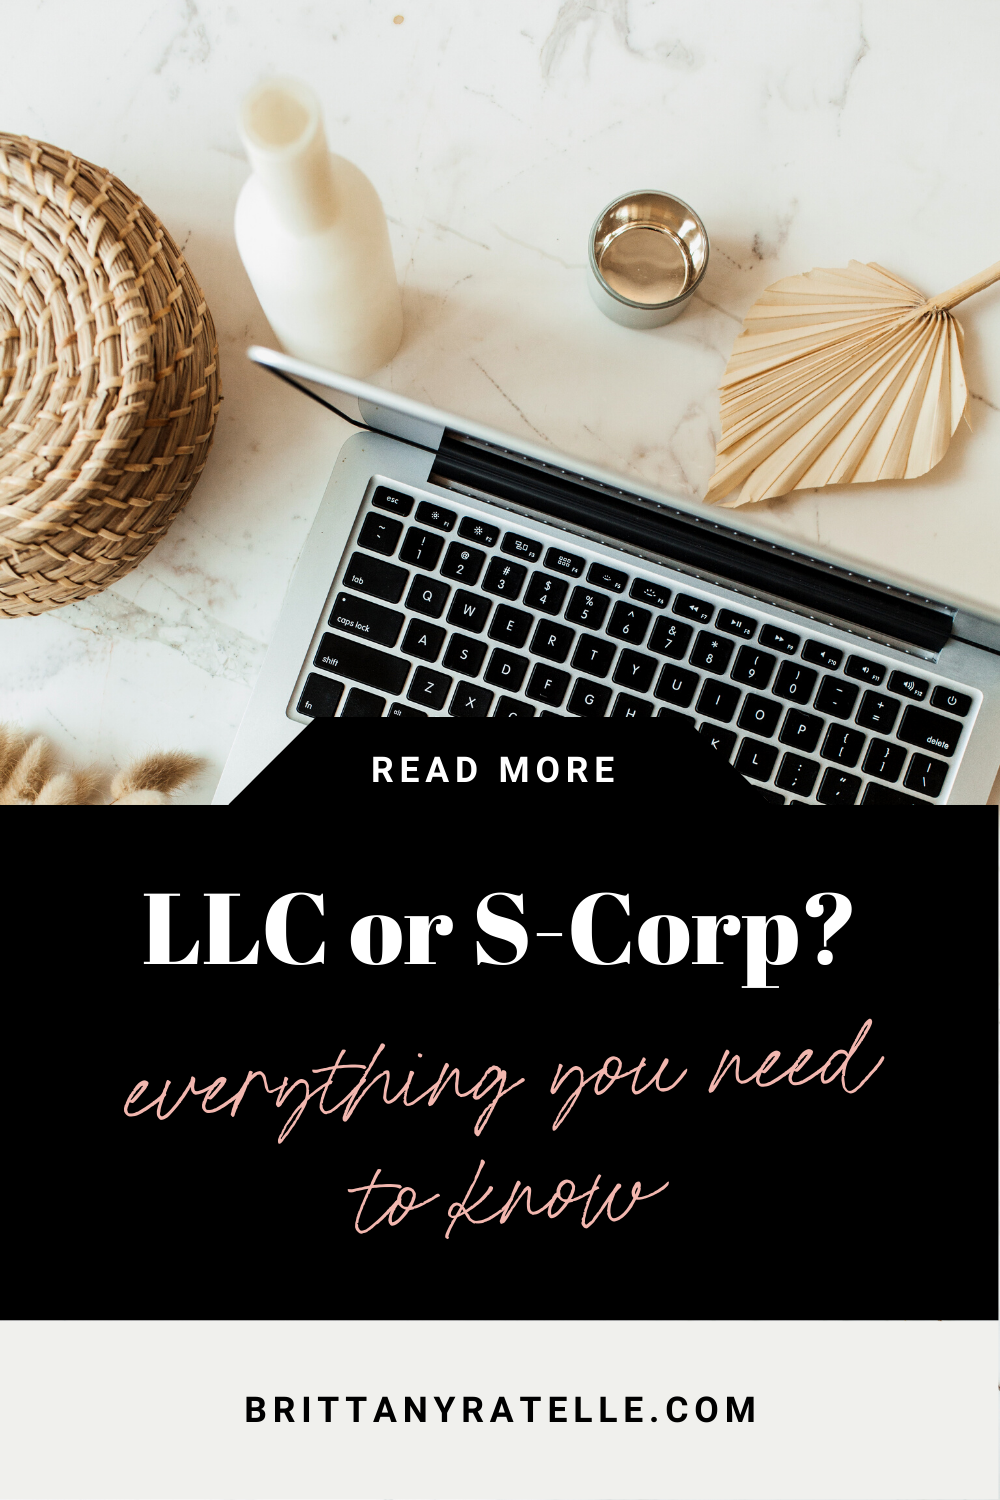 llc or s-corp for your online business? www.brittanyratelle.com